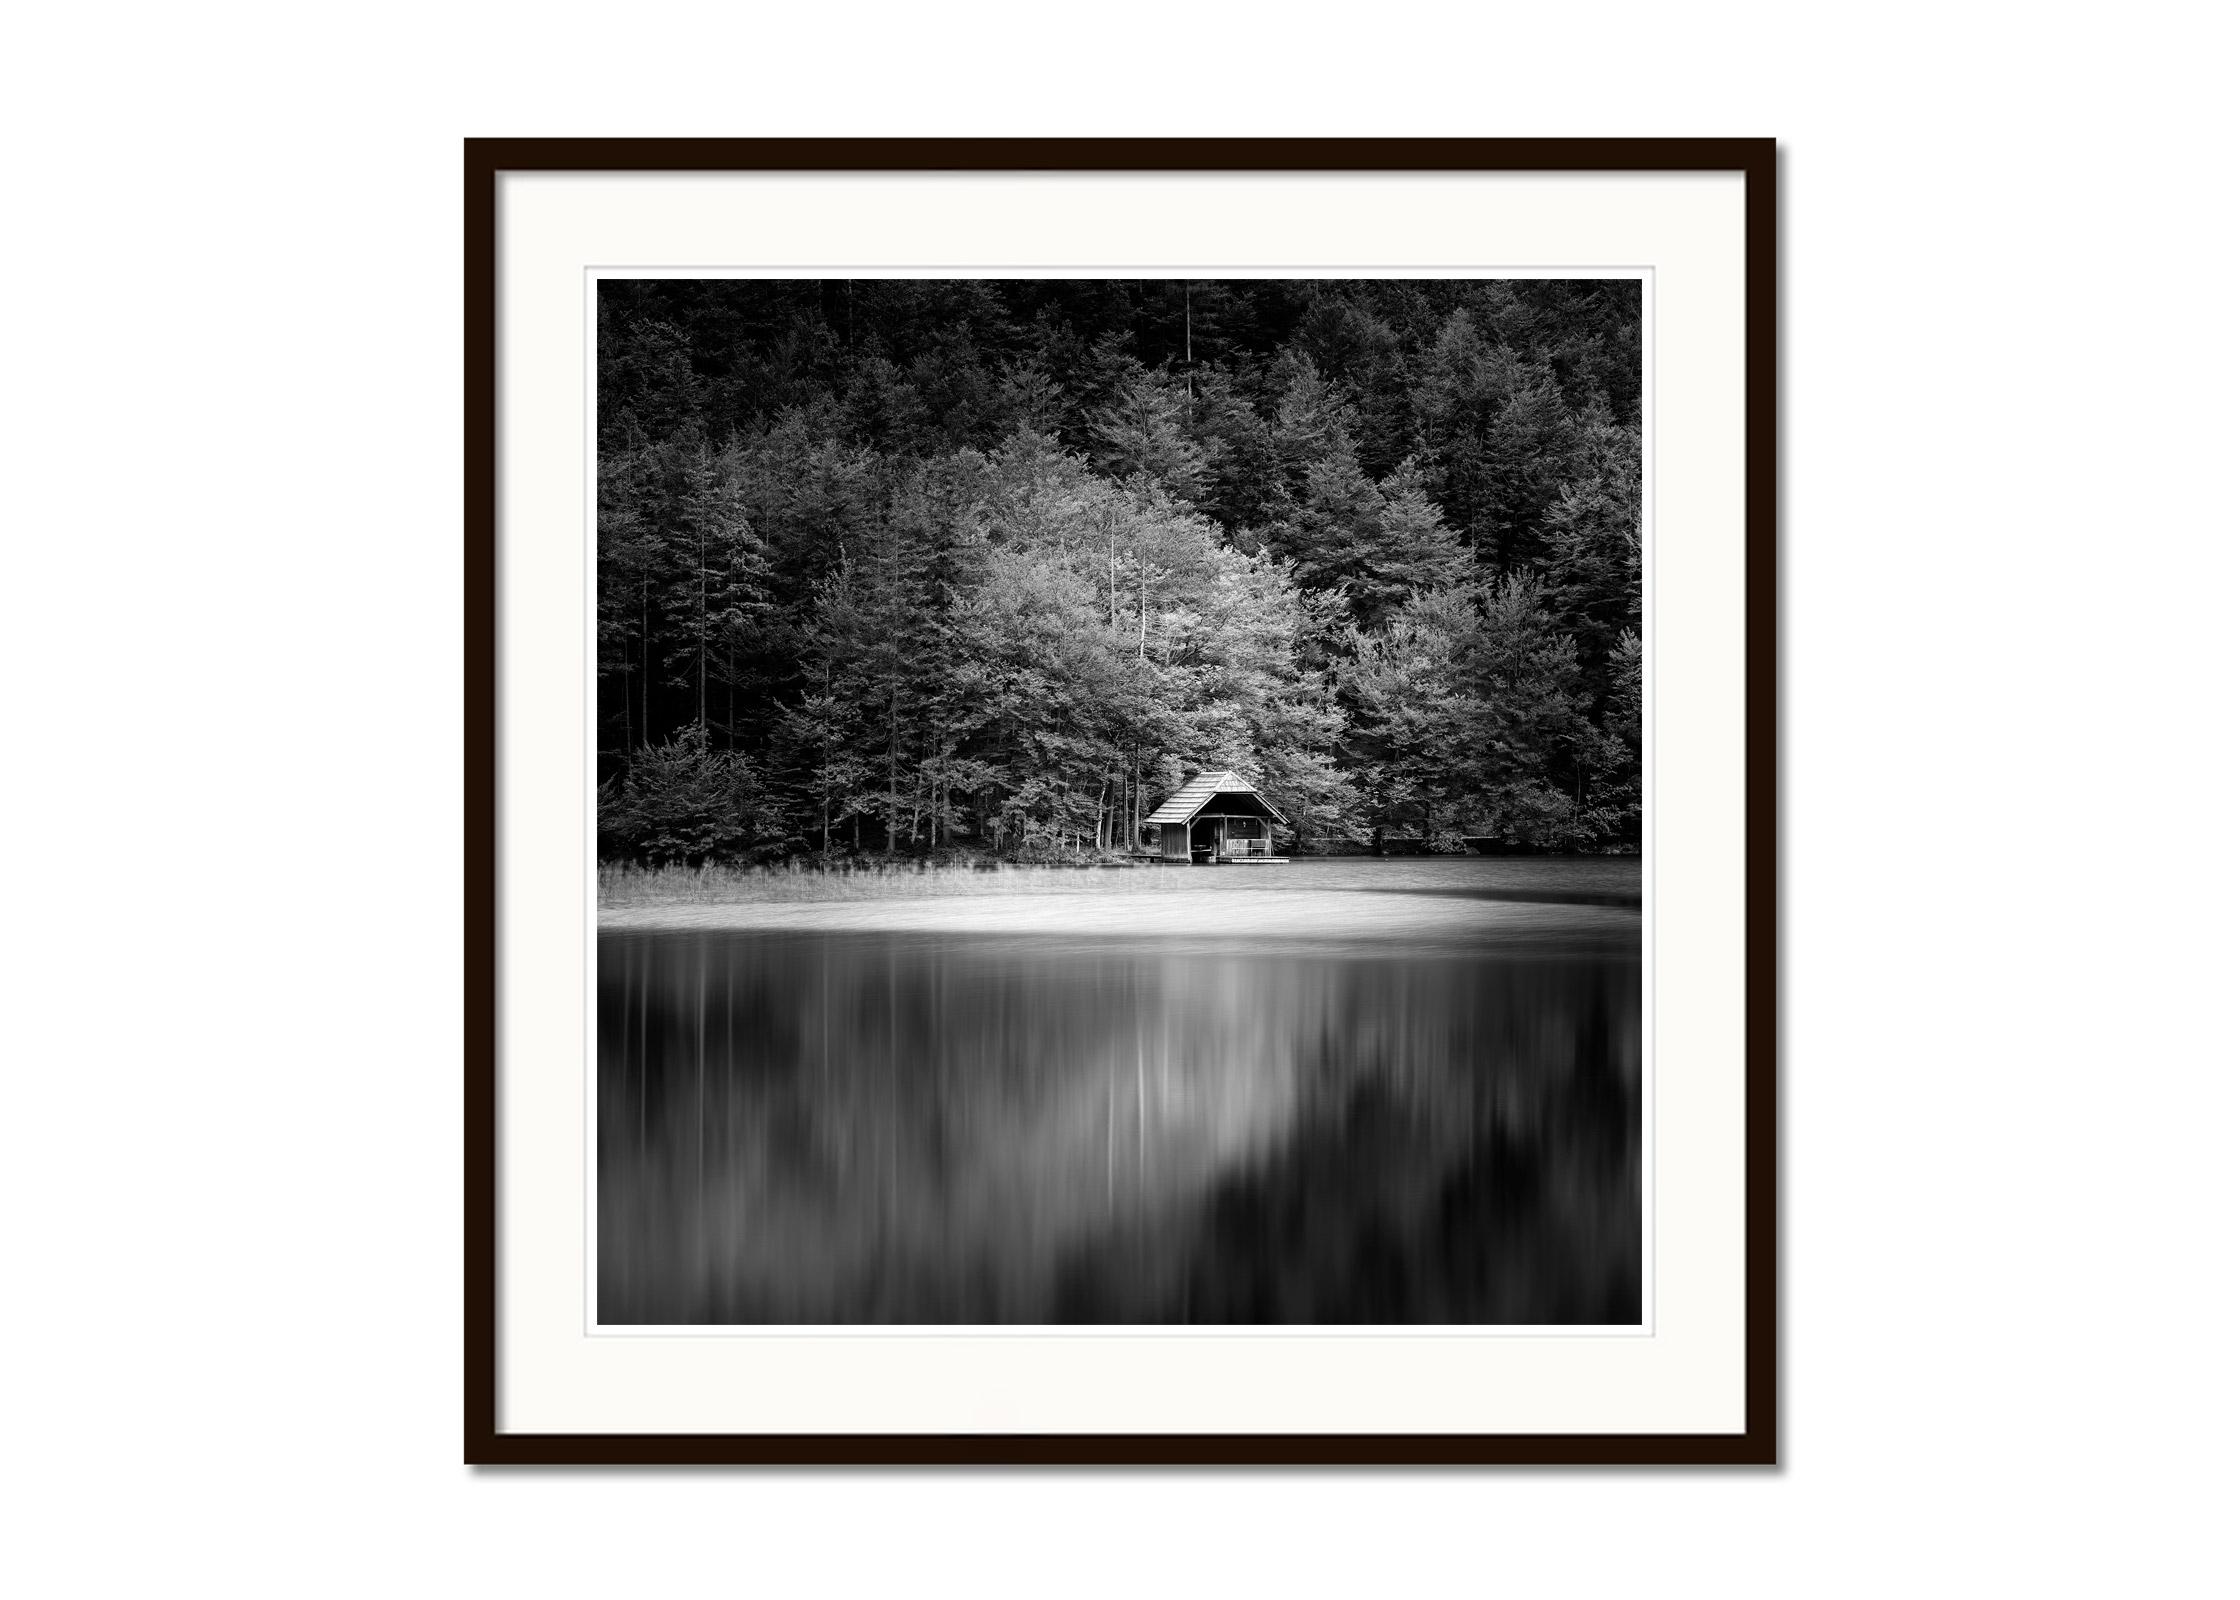 Wooden Boat House, black and white long exposure photography, fine art landscape - Black Landscape Photograph by Gerald Berghammer